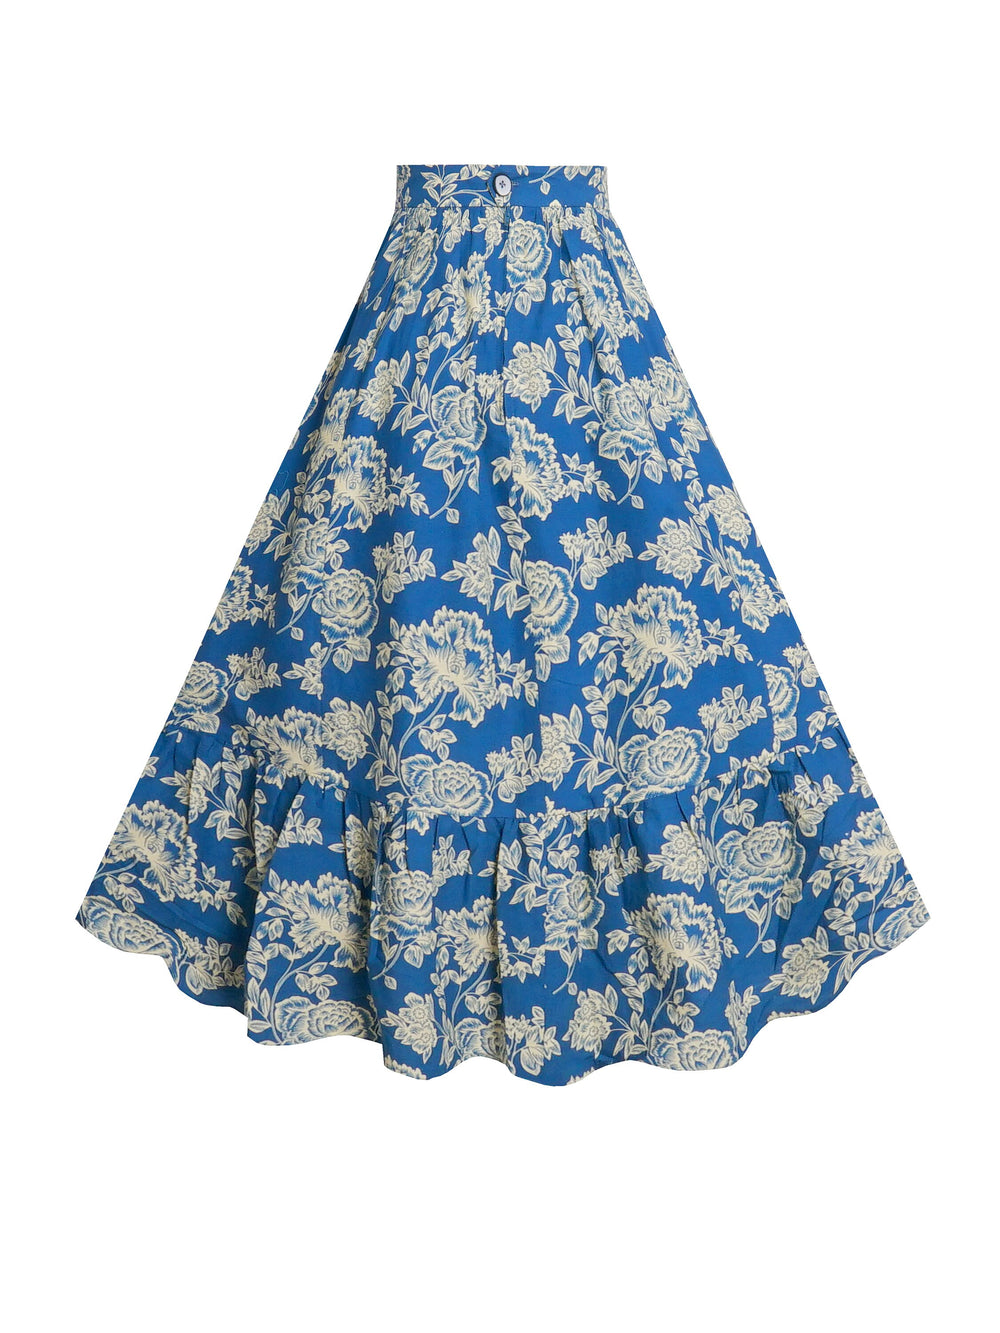 RTS - Size S - Rosita Skirt Blue "Waverly Floral"